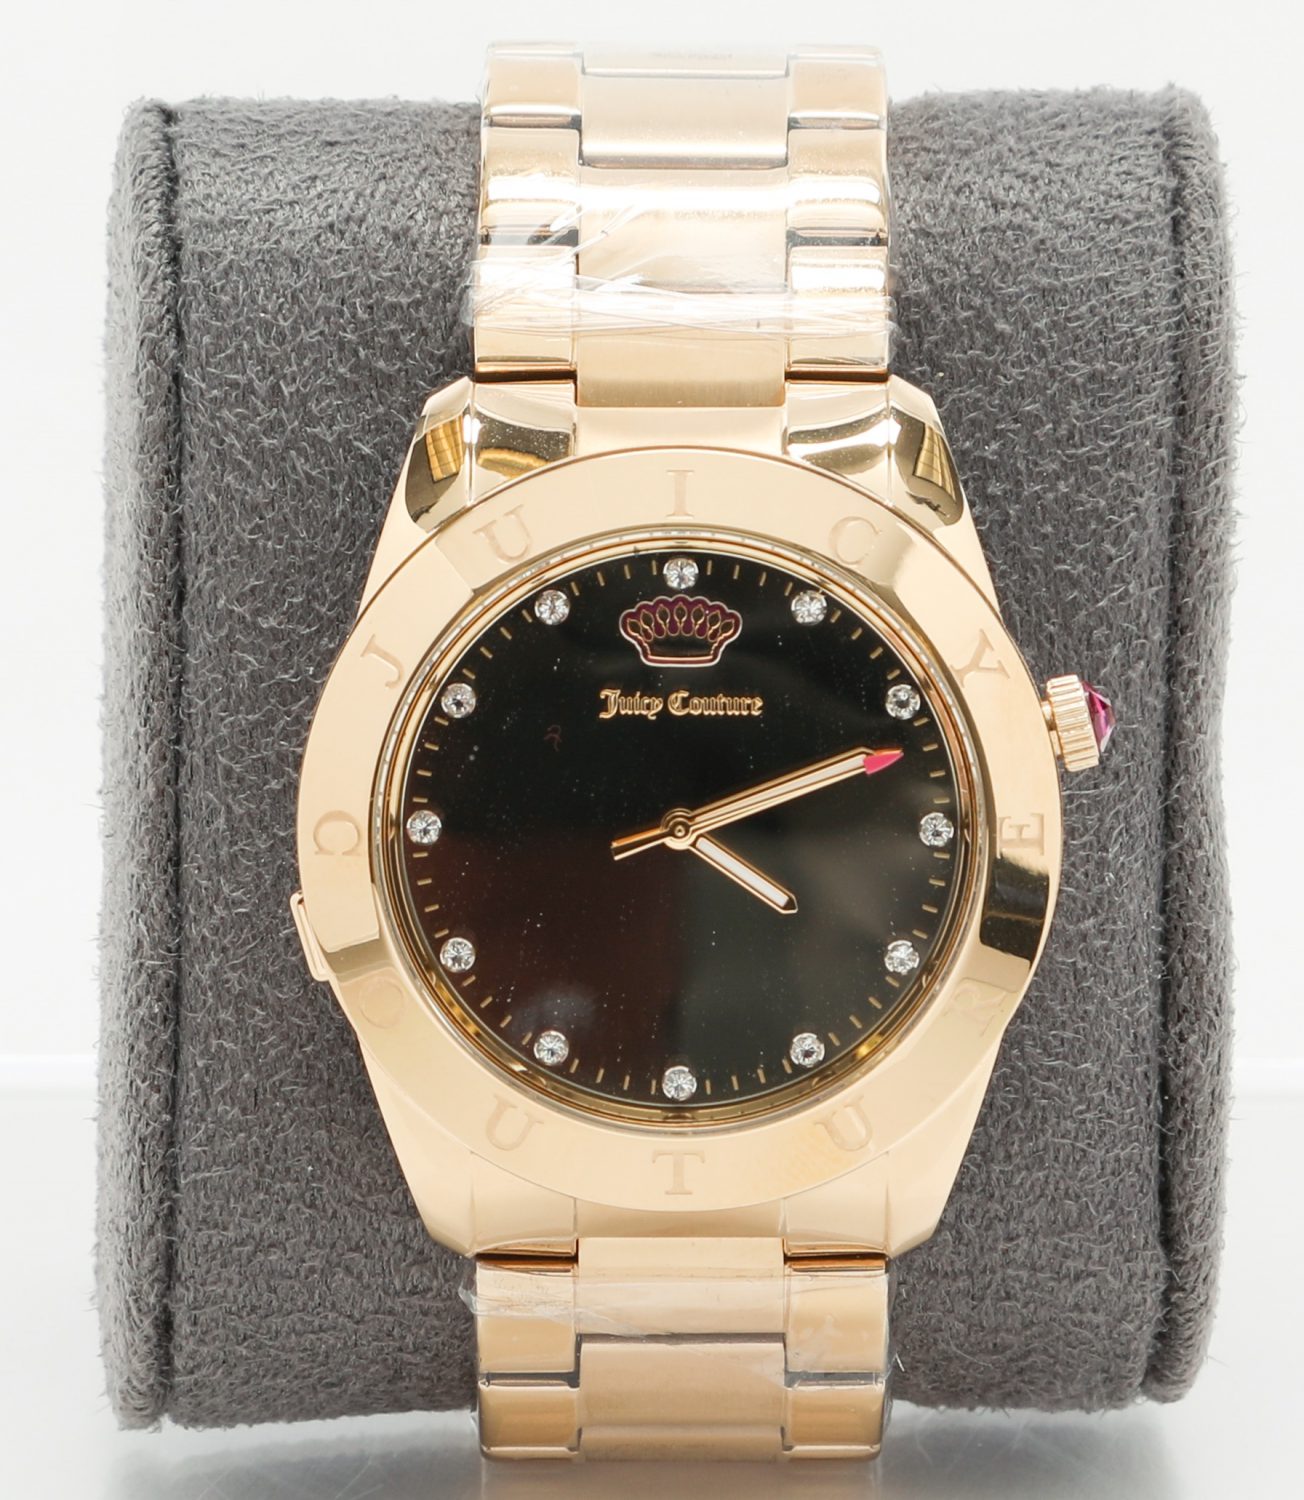 Gold smartwatch with black face and jeweled hour markers created in collaboration between HP and Juicy Couture.